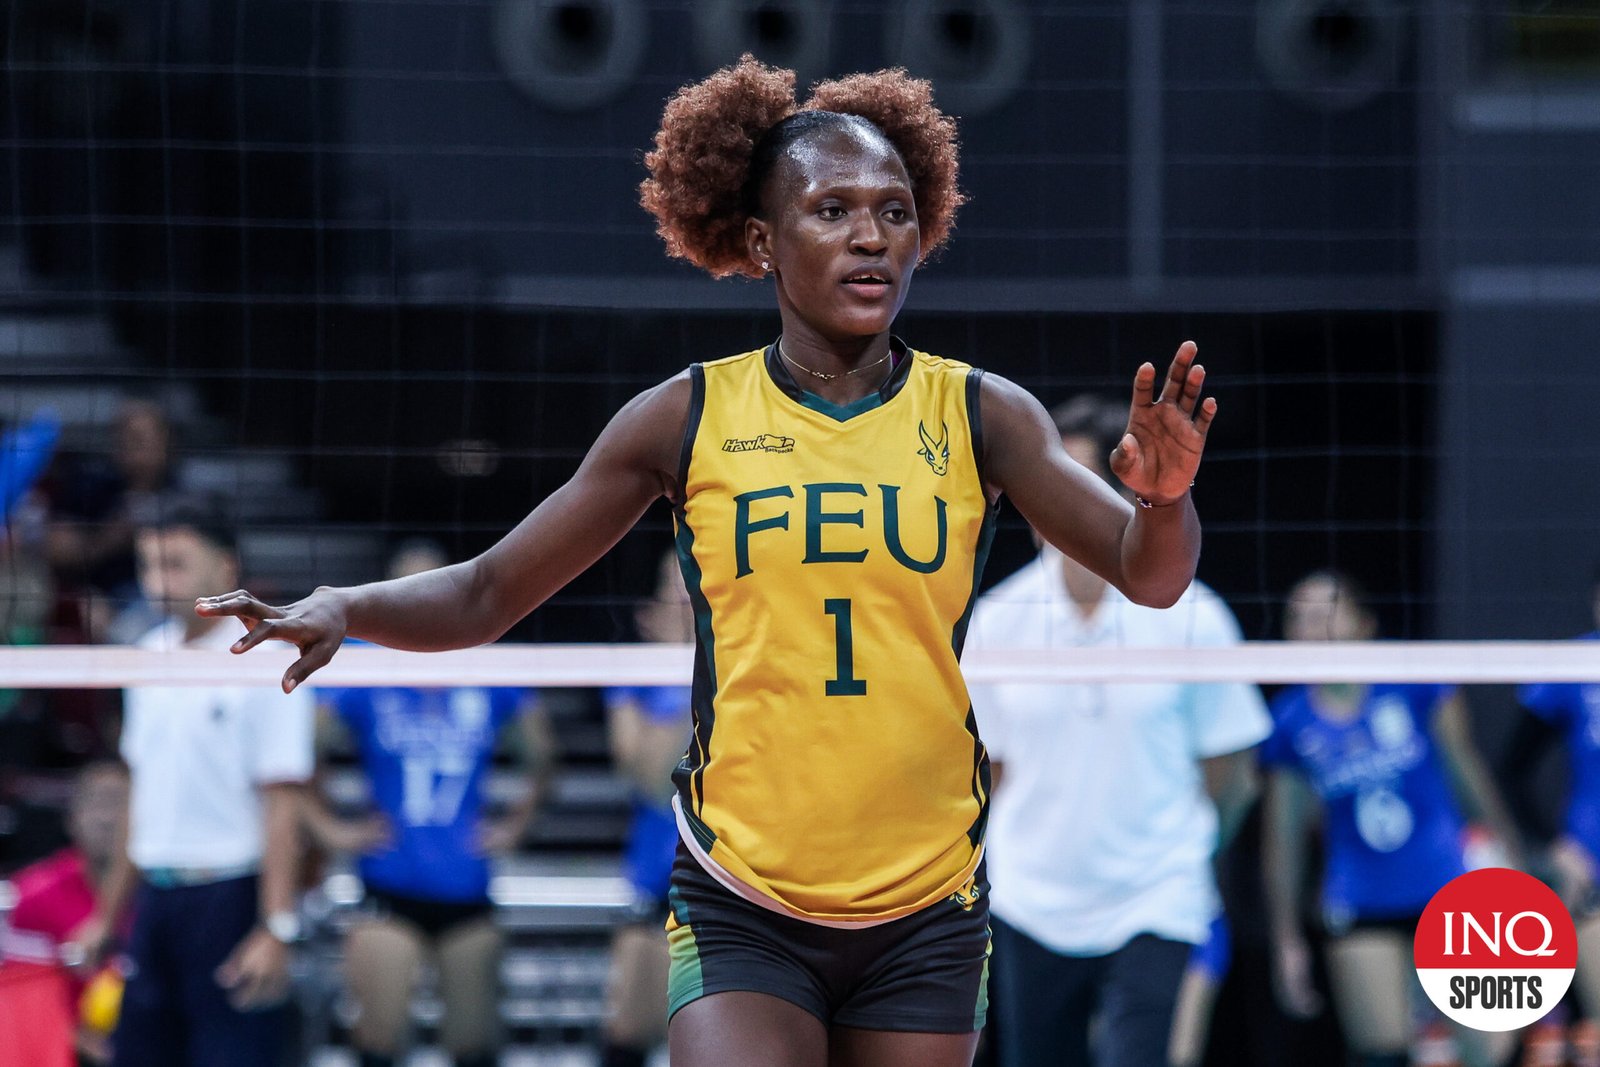 UAAP volleyball: Faida Bakanke continues to deliver for FEU